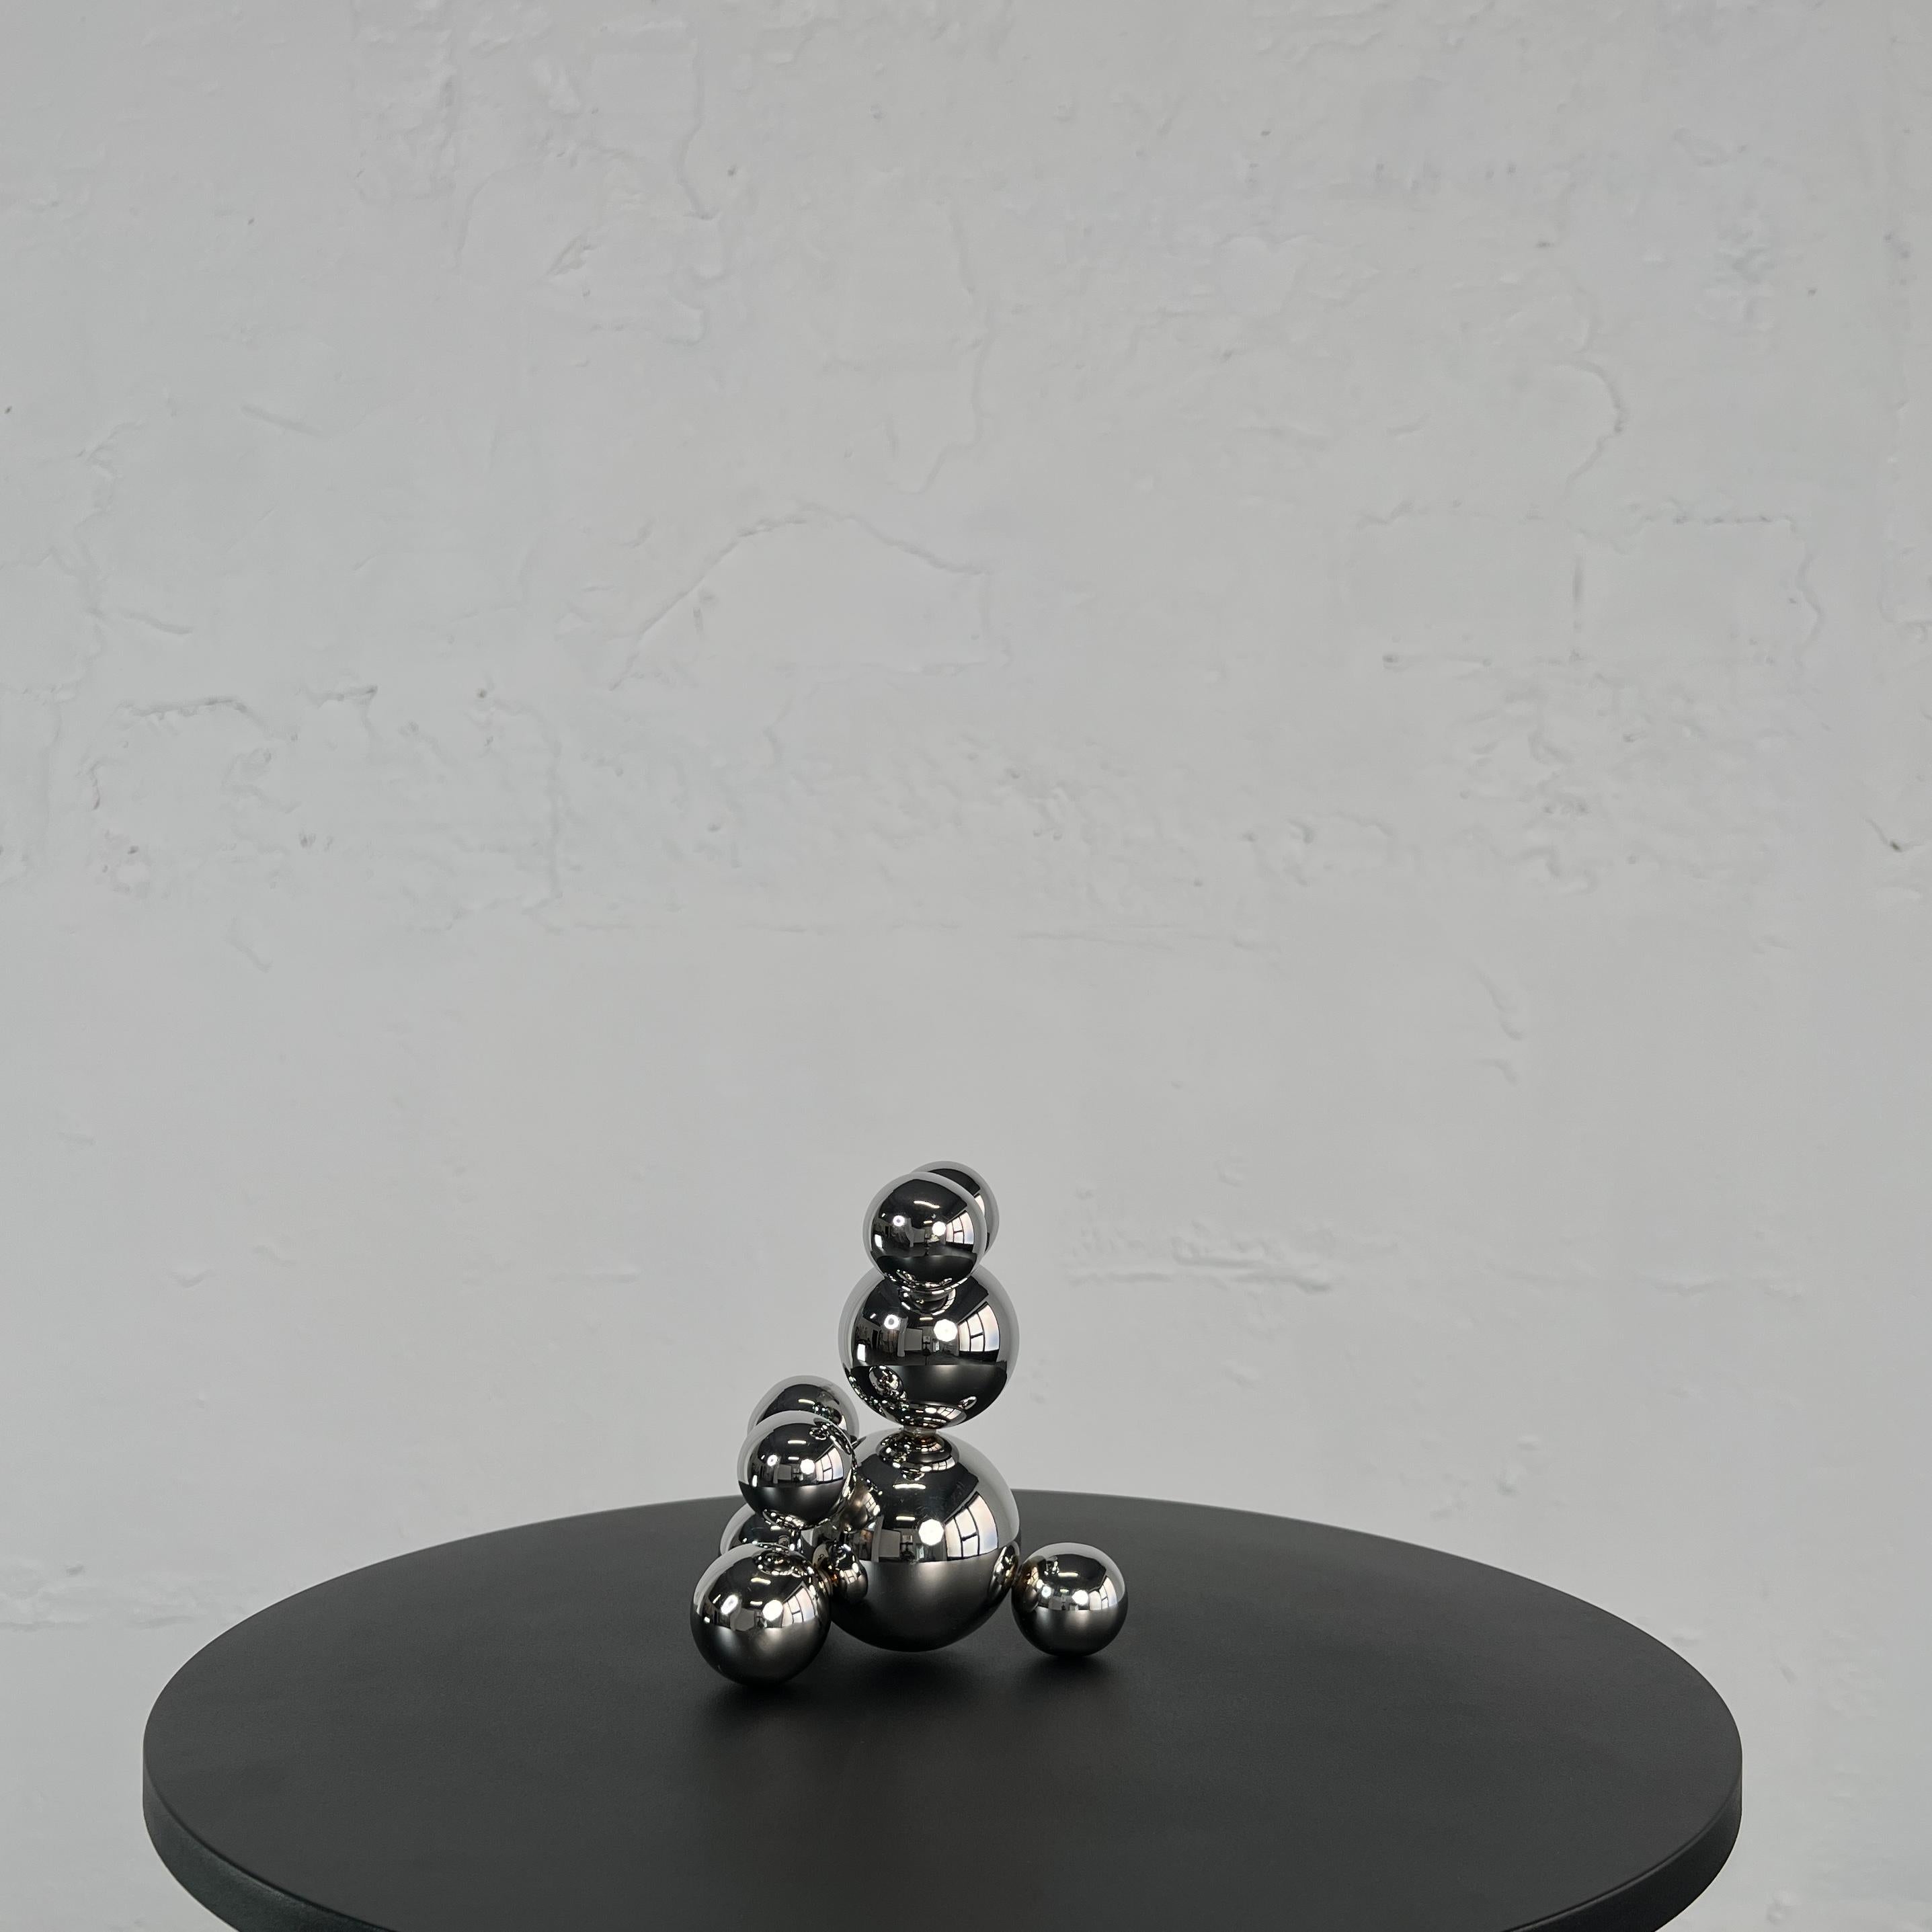 Tiny Stainless Steel Bear 'Ricky' Sculpture Minimalistic Animal For Sale 2